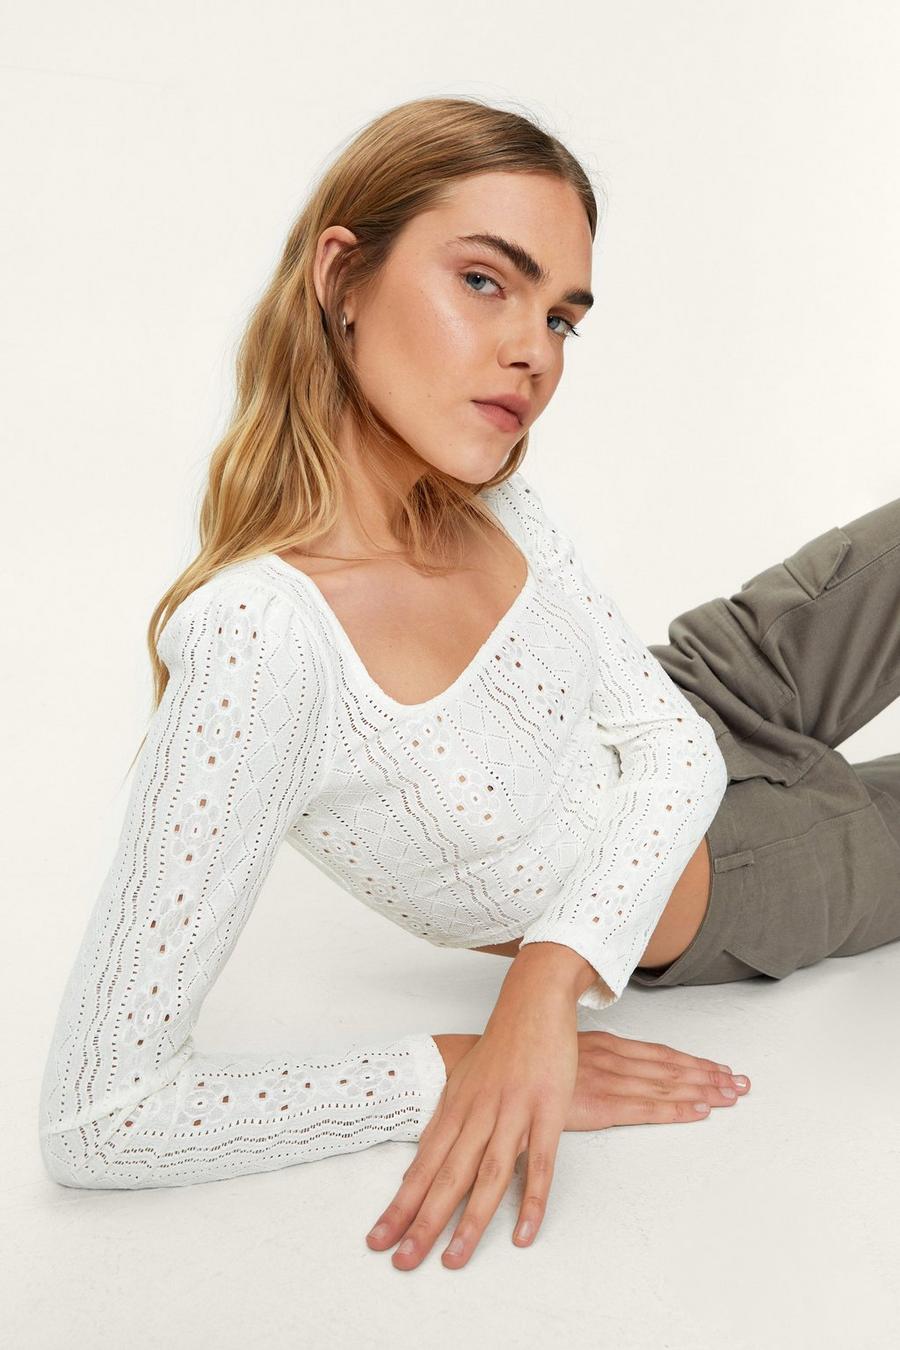 Square Neckline Stretchy Lace Long Sleeve Top